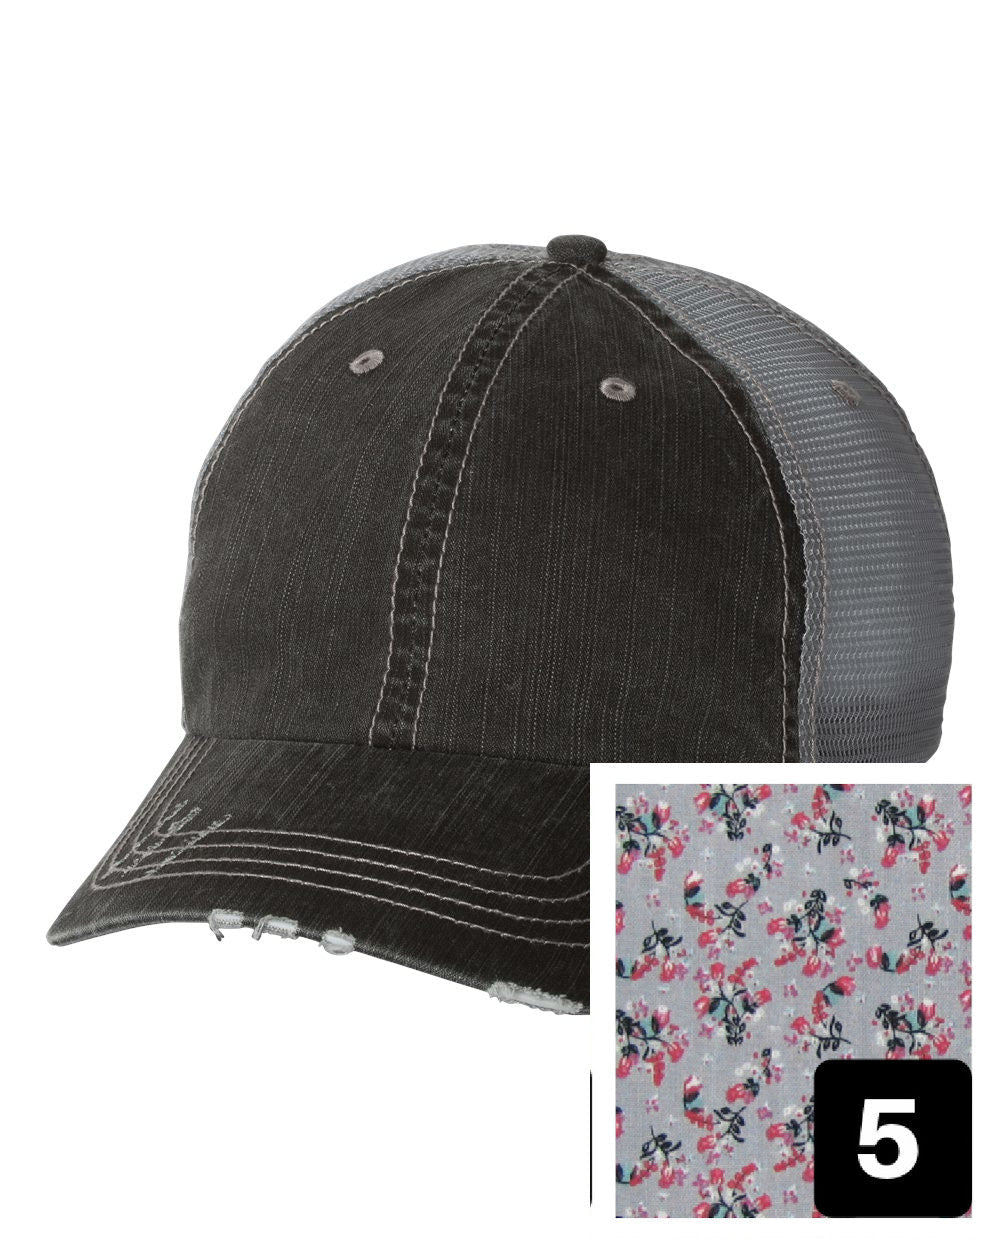 gray distressed trucker hat with purple and pink floral fabric state of Michigan